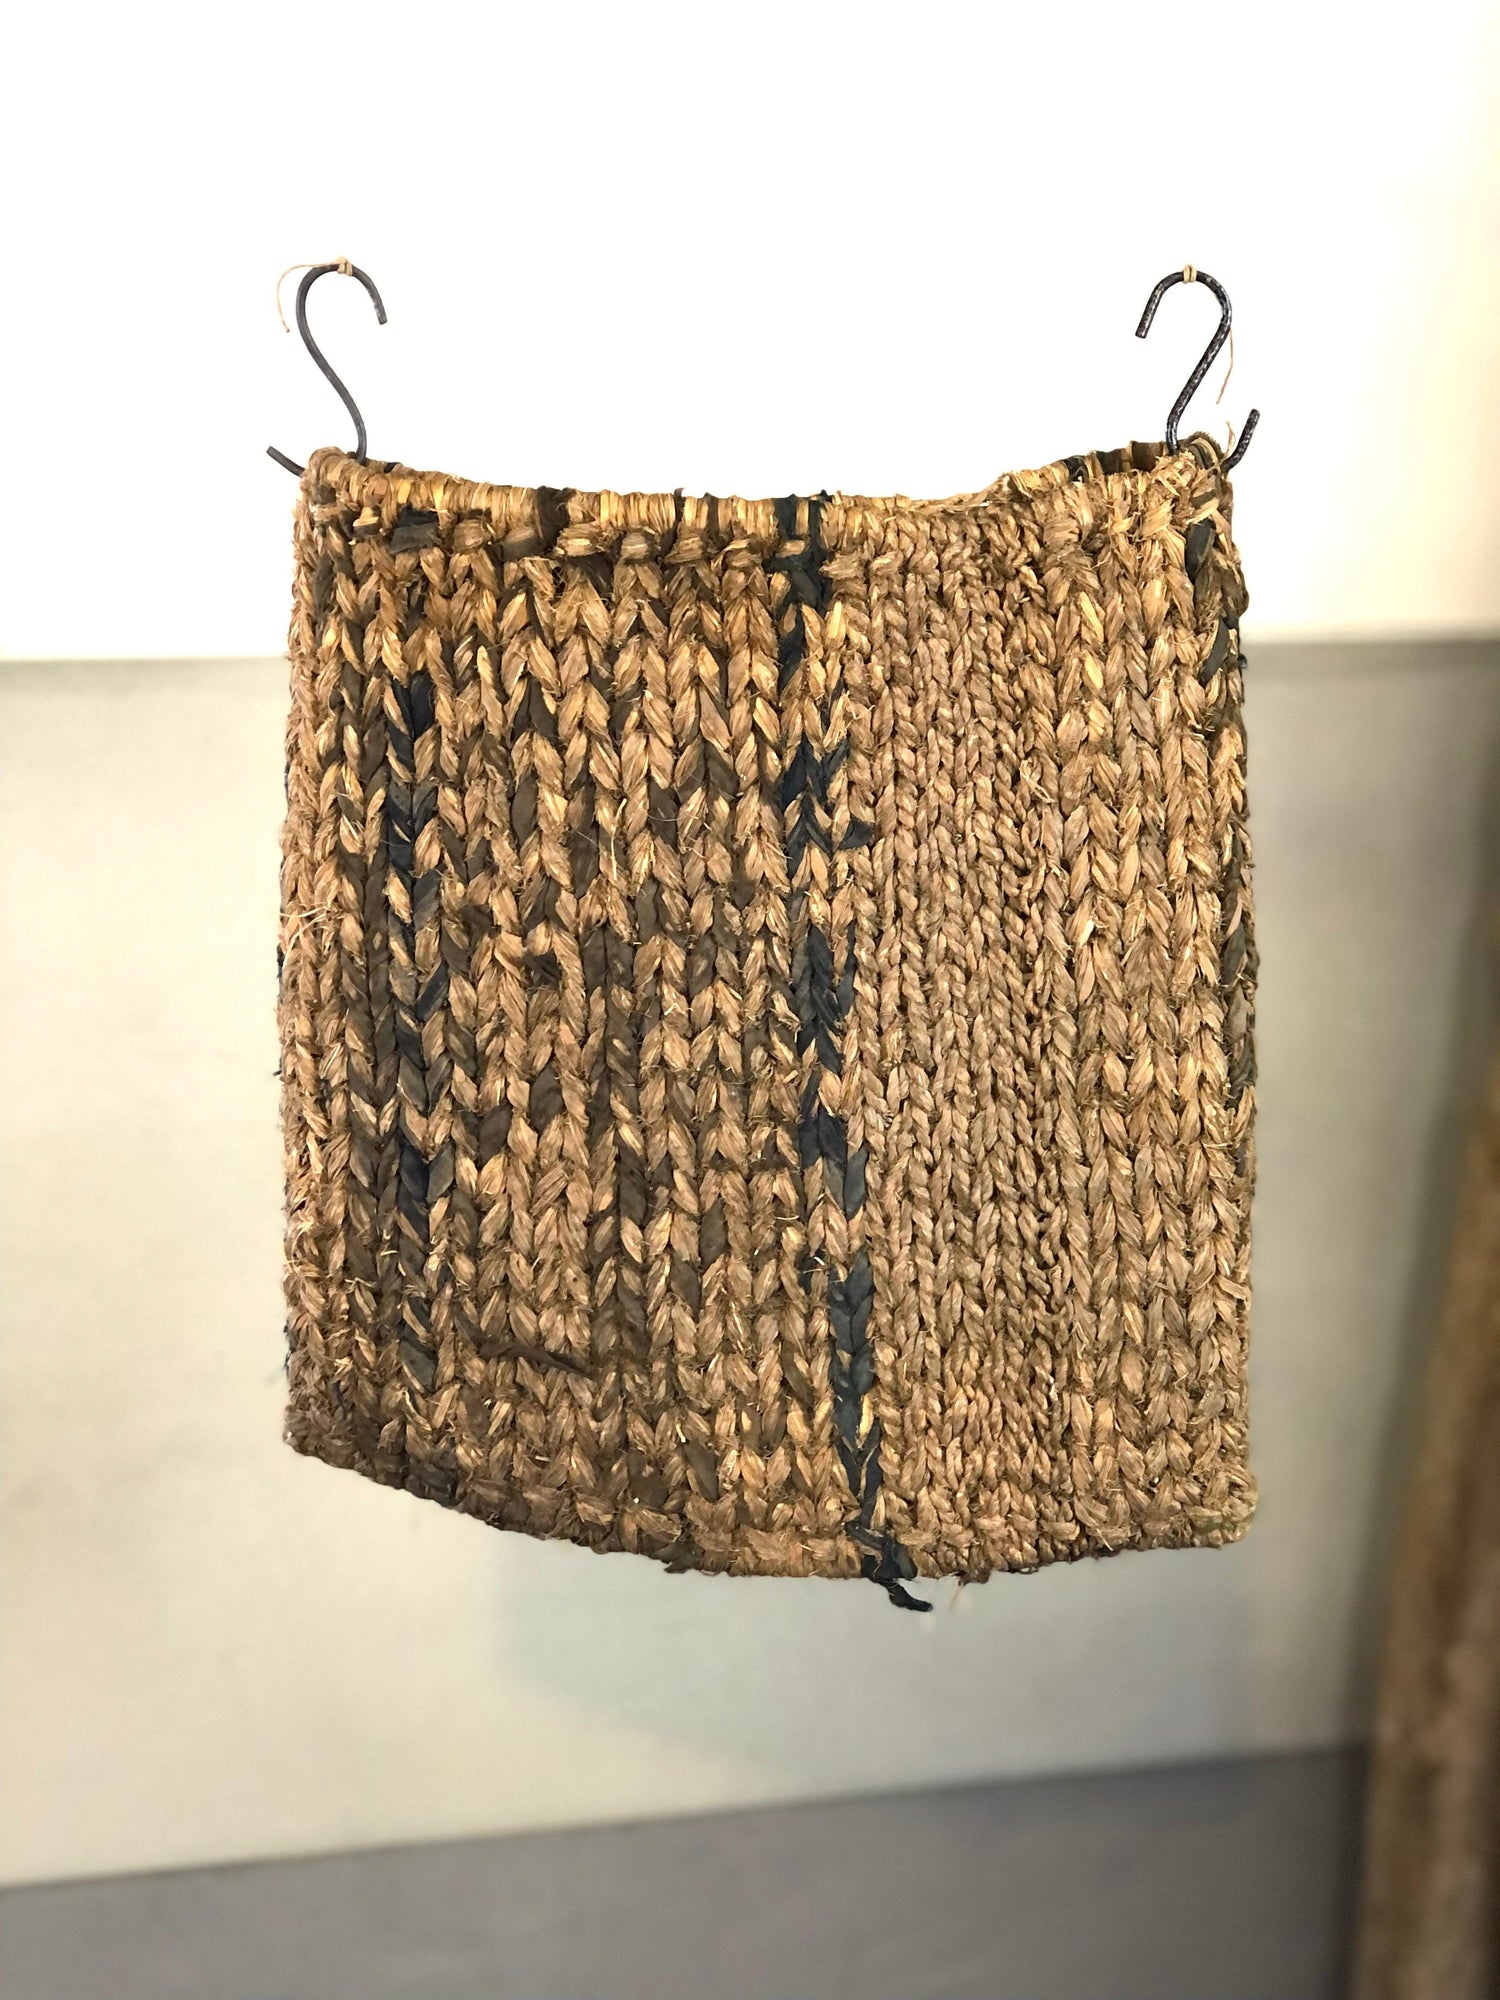 Japanese antique bag made of straw and cloth that is over 100 years old - VINTAGE BLUE JAPAN